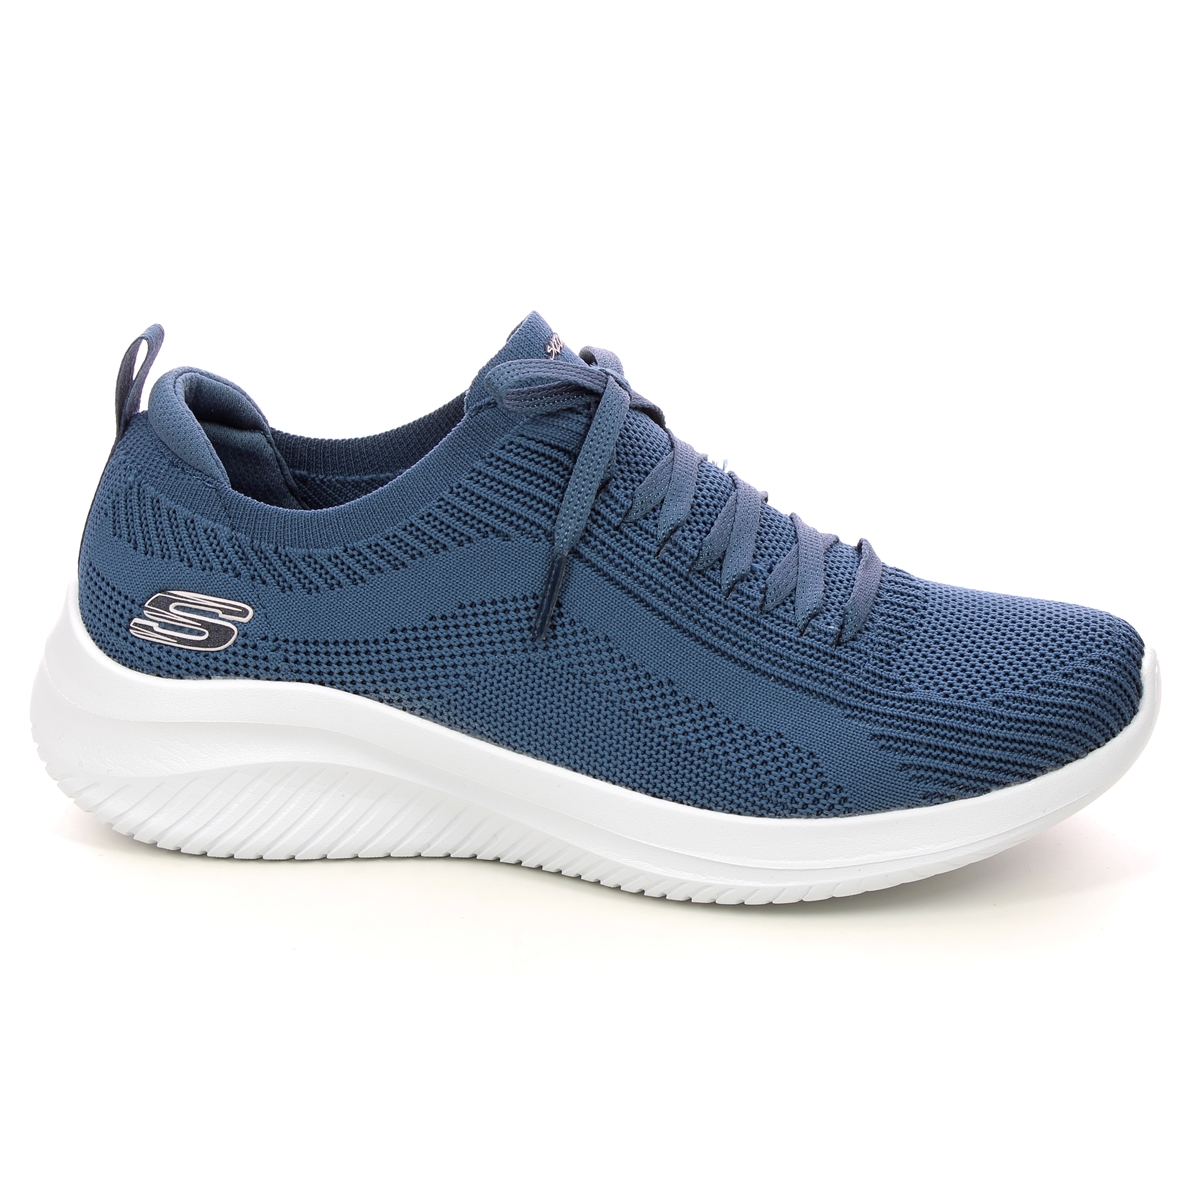 Skechers Ultra Flex 3.0 NVY Navy Womens trainers 149854